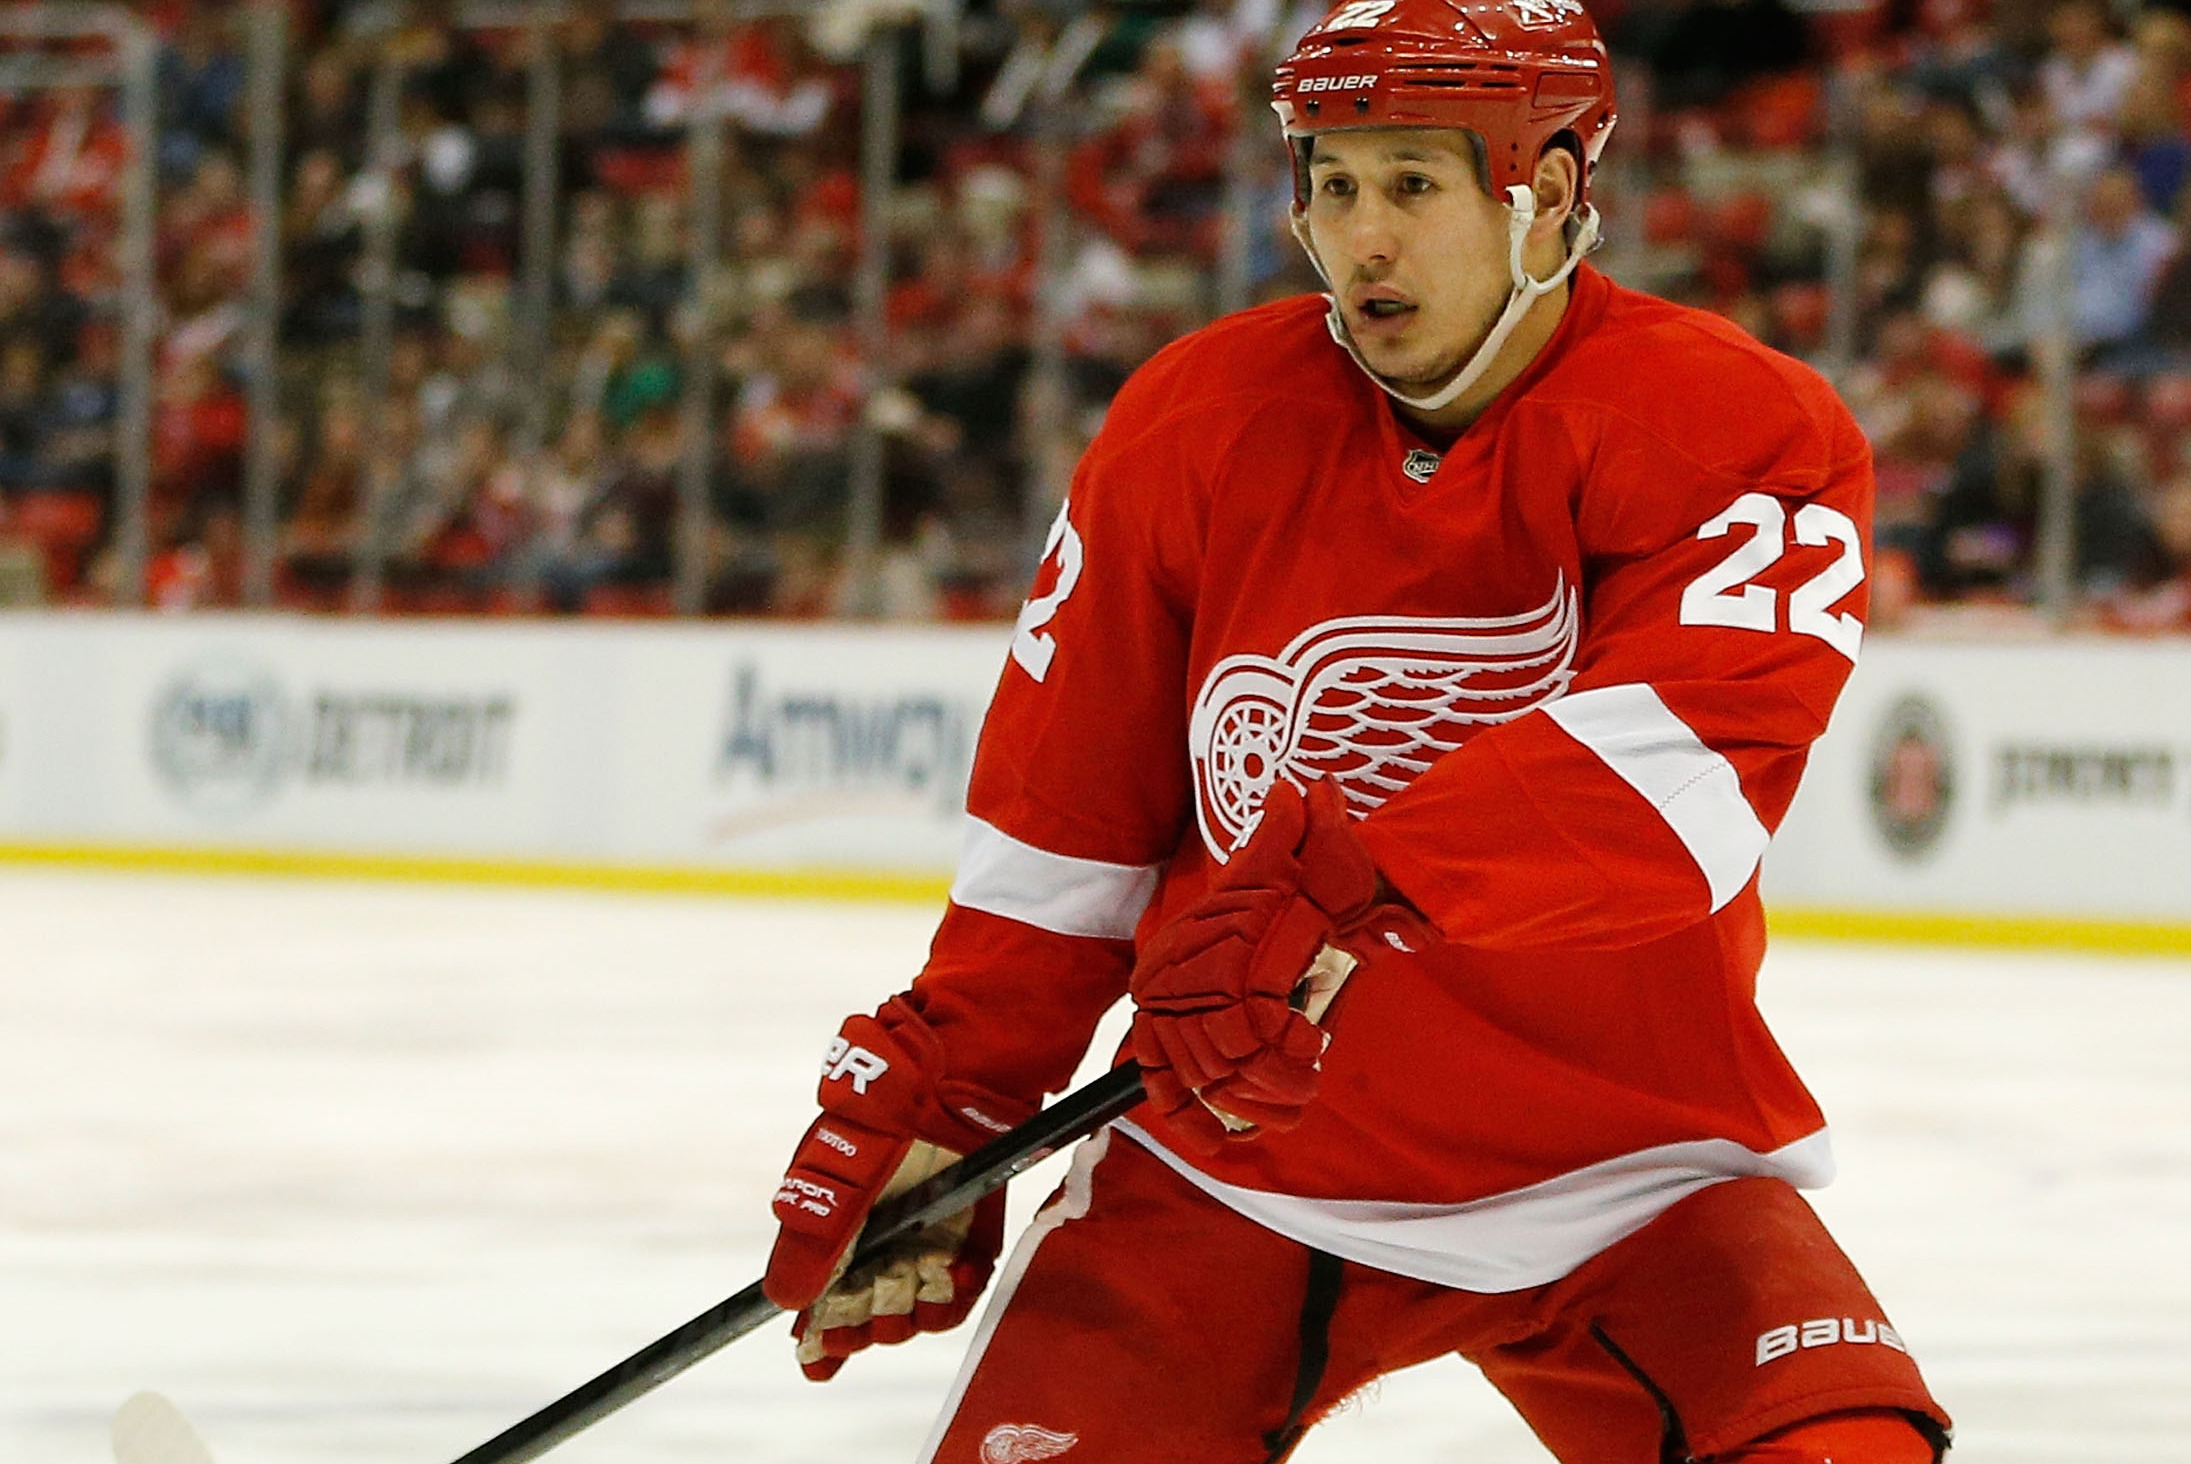 Red Wings send Nunavut's Jordin Tootoo to the minors